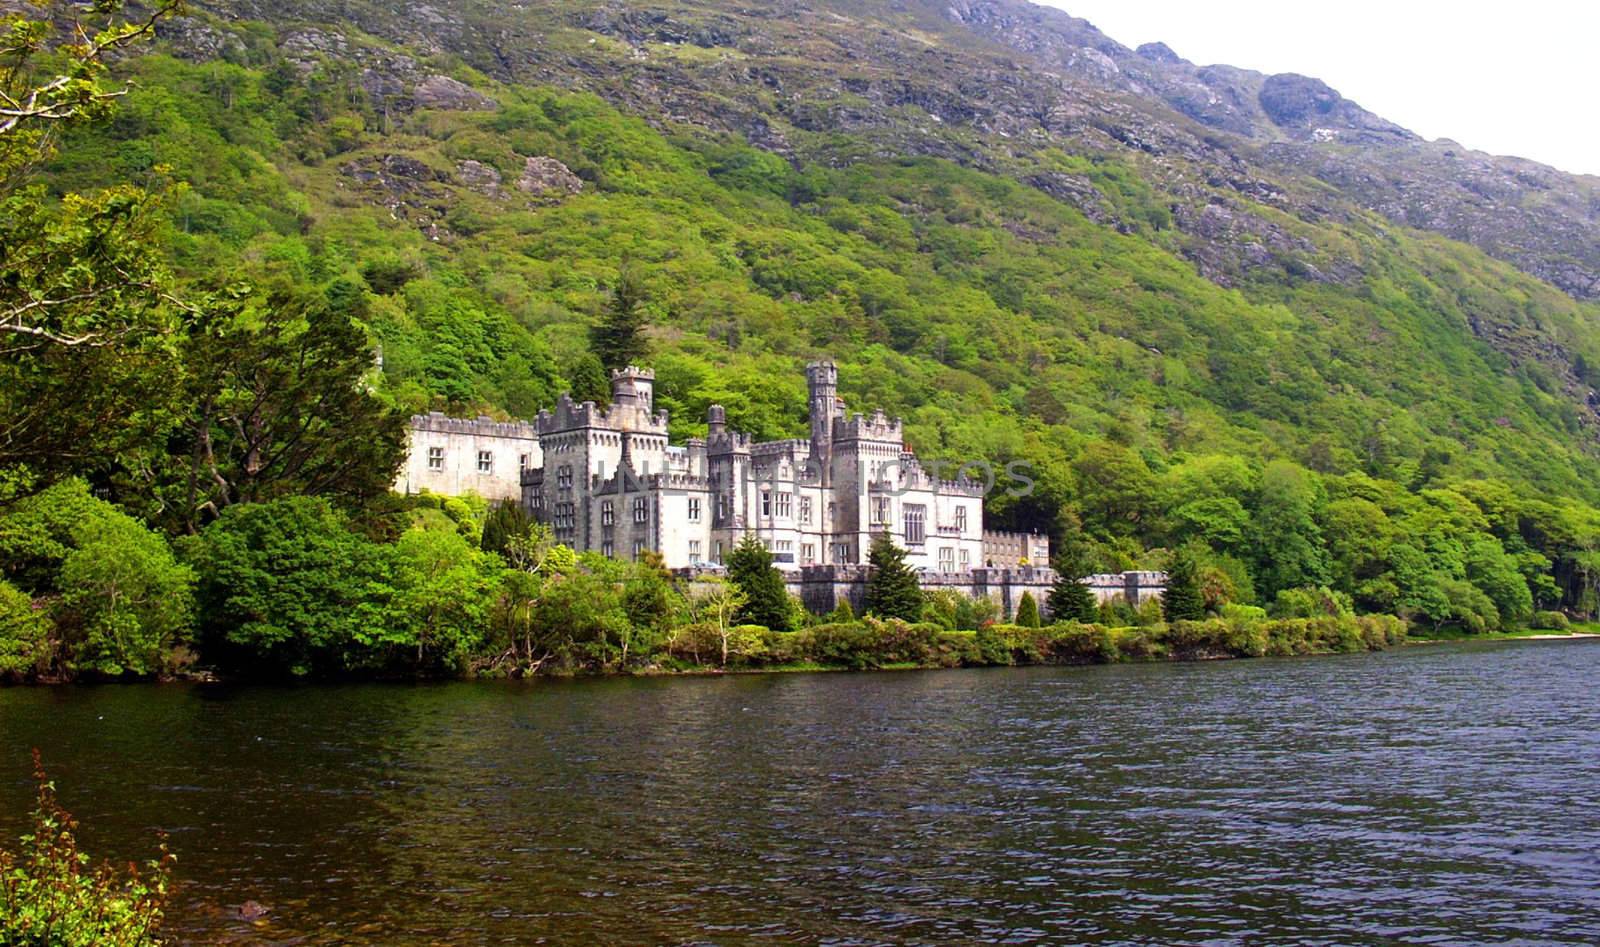 The Kylemore Castle and Loch (lake). The castle is now an Abbey.
